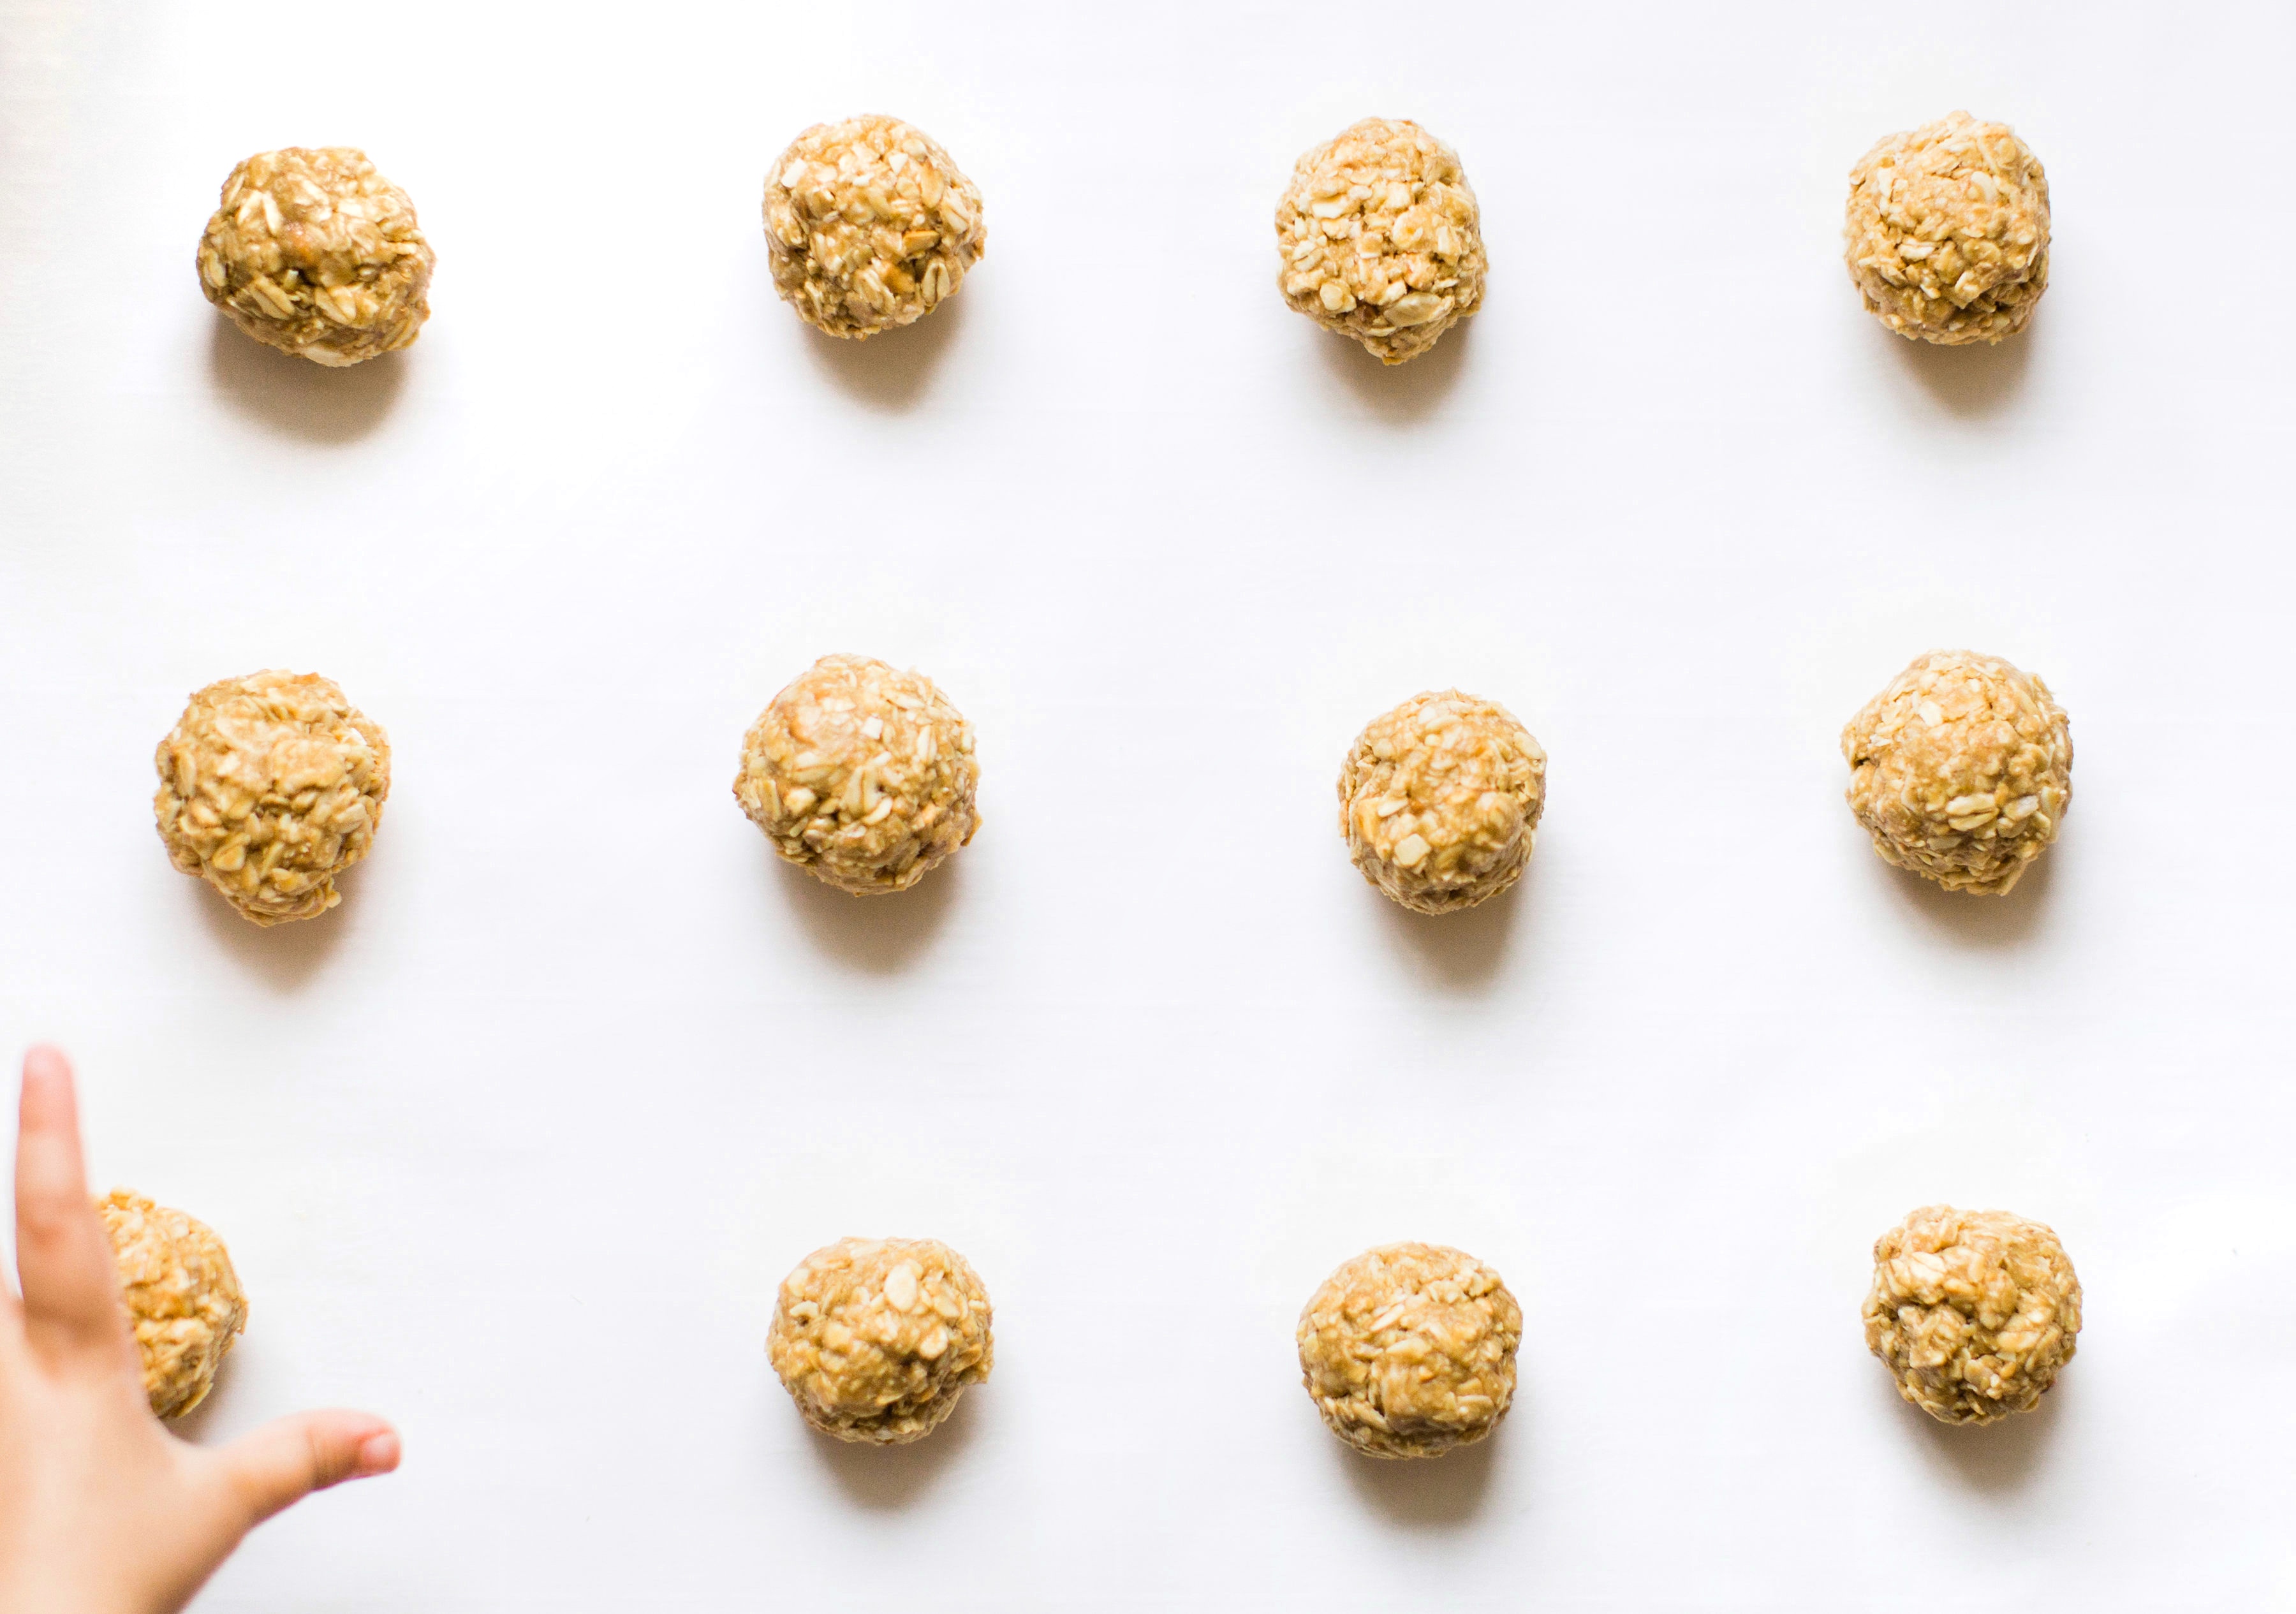 These no-bake energy bites are easy to make, the perfect combination of sweet and salty, have plenty of added protein thanks to the peanut butter, and kids absolutely love them because they're basically delicious no-bake cookies! Click through for the recipe. #snack #energybites #nobake #nobakecookies #healthysnack #kidsrecipe #kidssnack | glitterinc.com | @glitterinc